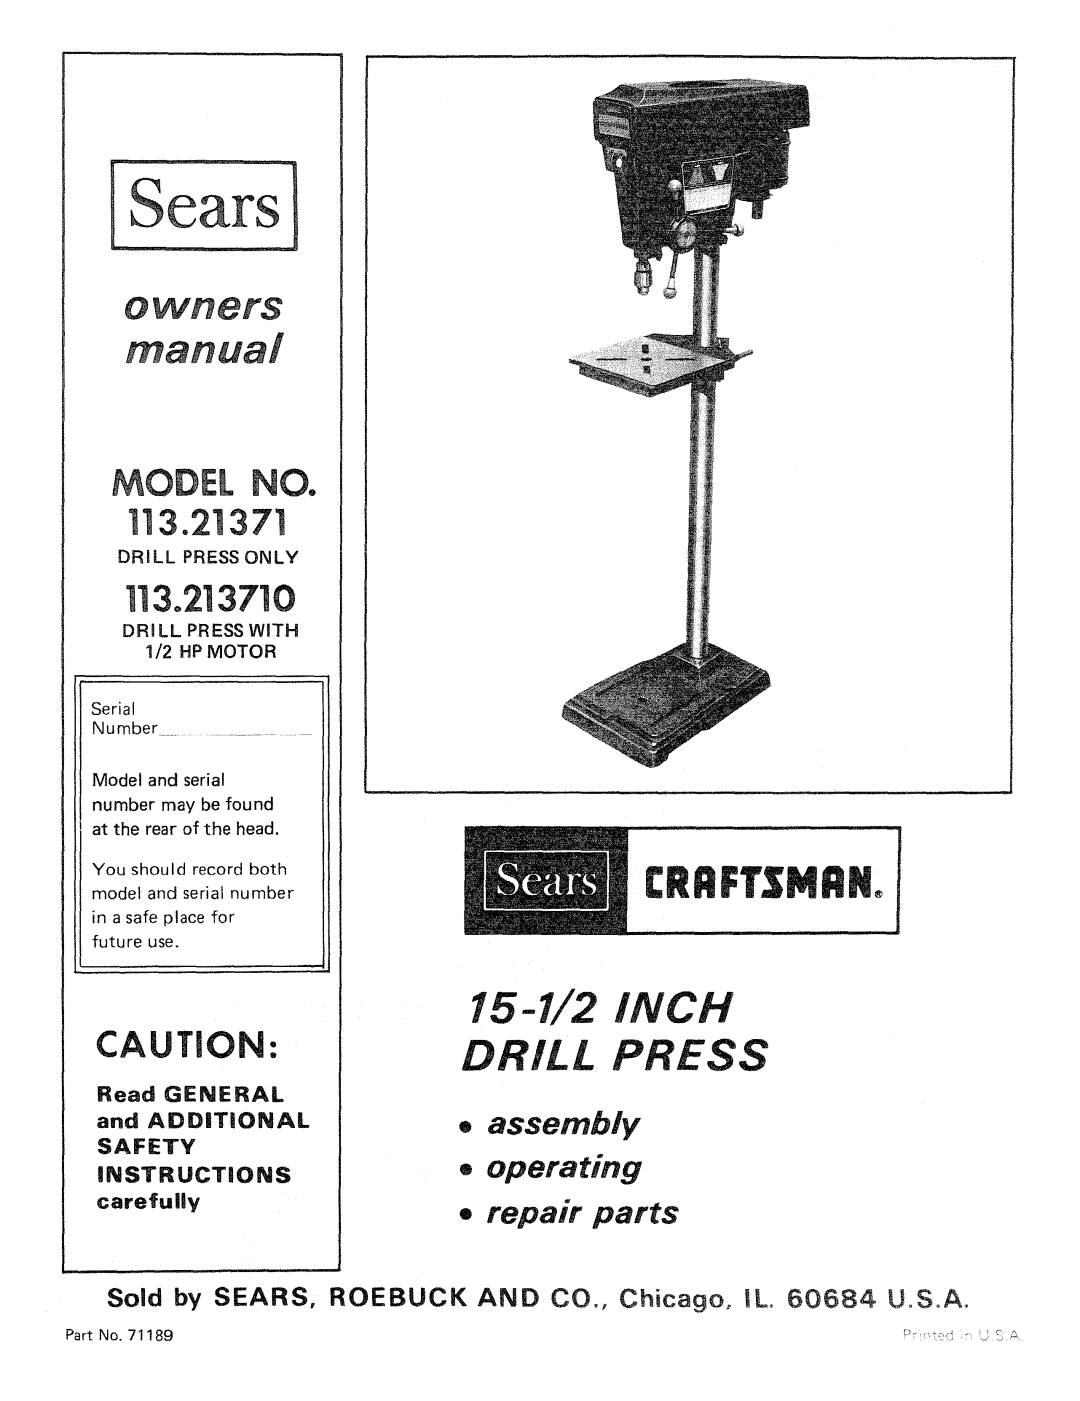 Sears manual Model No, 113.213710, Sold by SEARS, ROEBUCK AND CO., Chicago, IL. 60684 U.S.A, 15-1/2 INCH, Drill Press 